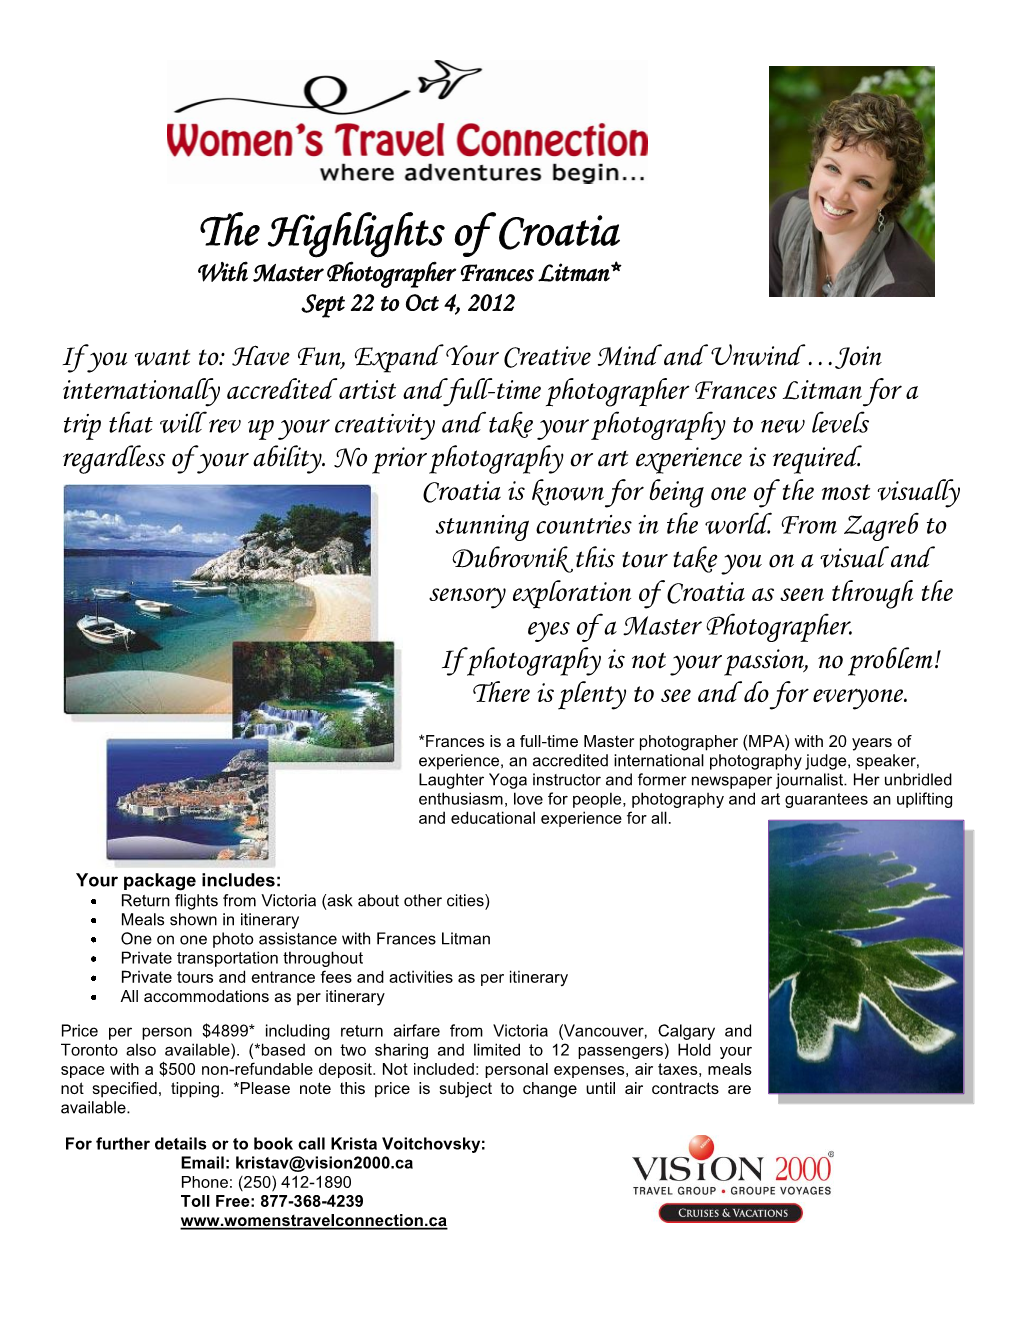 The Highlights of Croatia with Master Photographer Frances Litman* Sept 22 to Oct 4, 2012